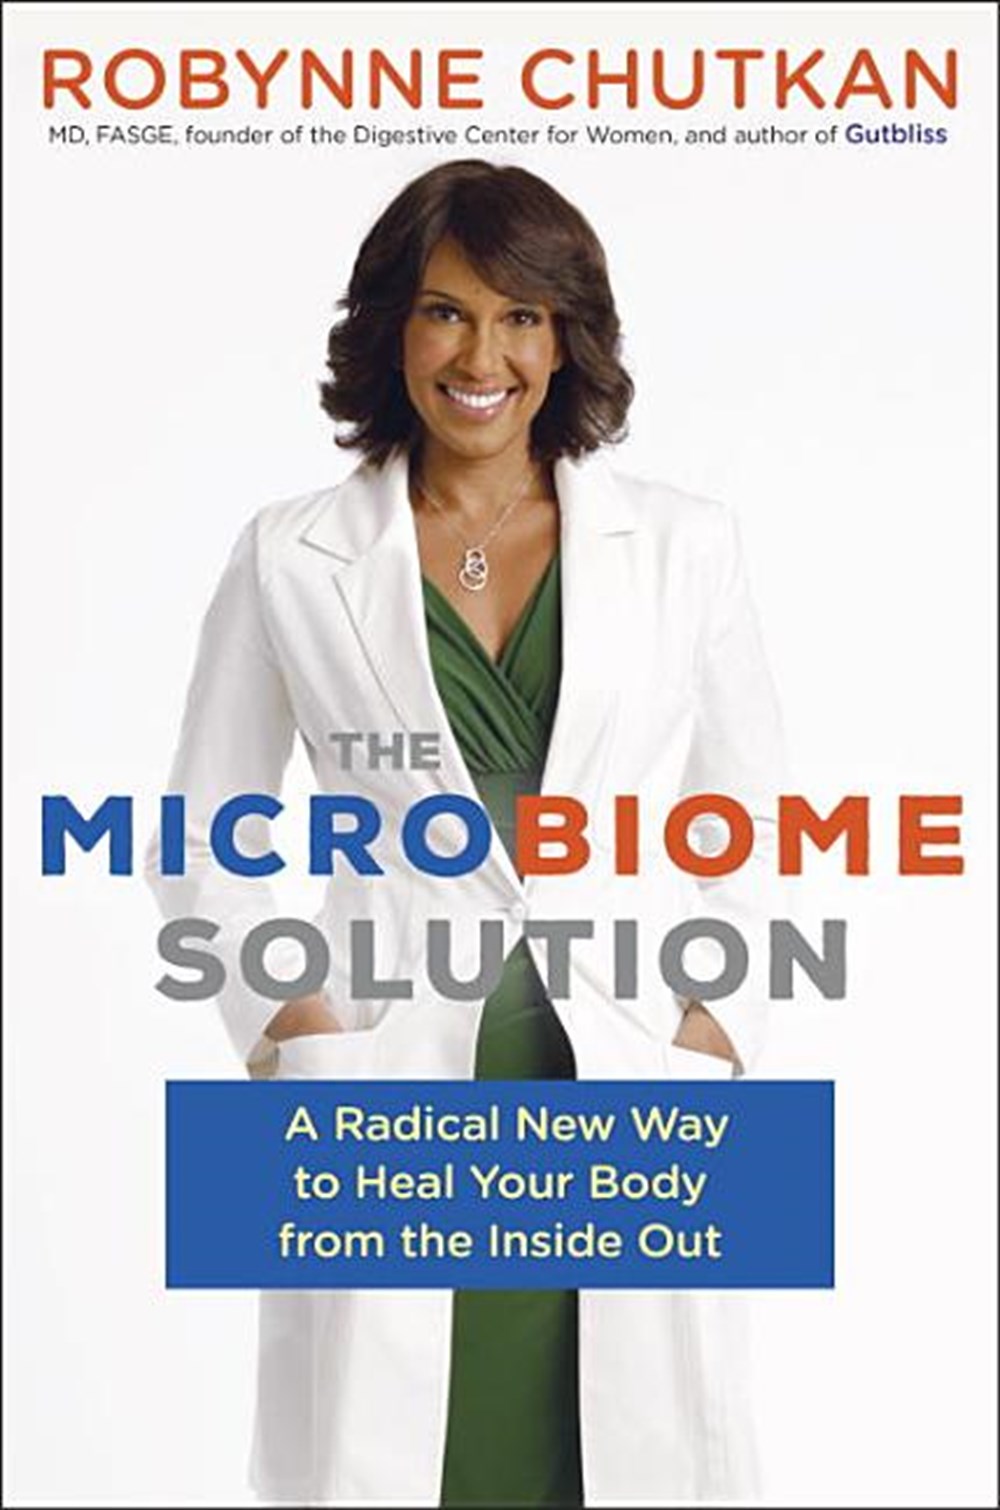 Microbiome Solution: A Radical New Way to Heal Your Body from the Inside Out